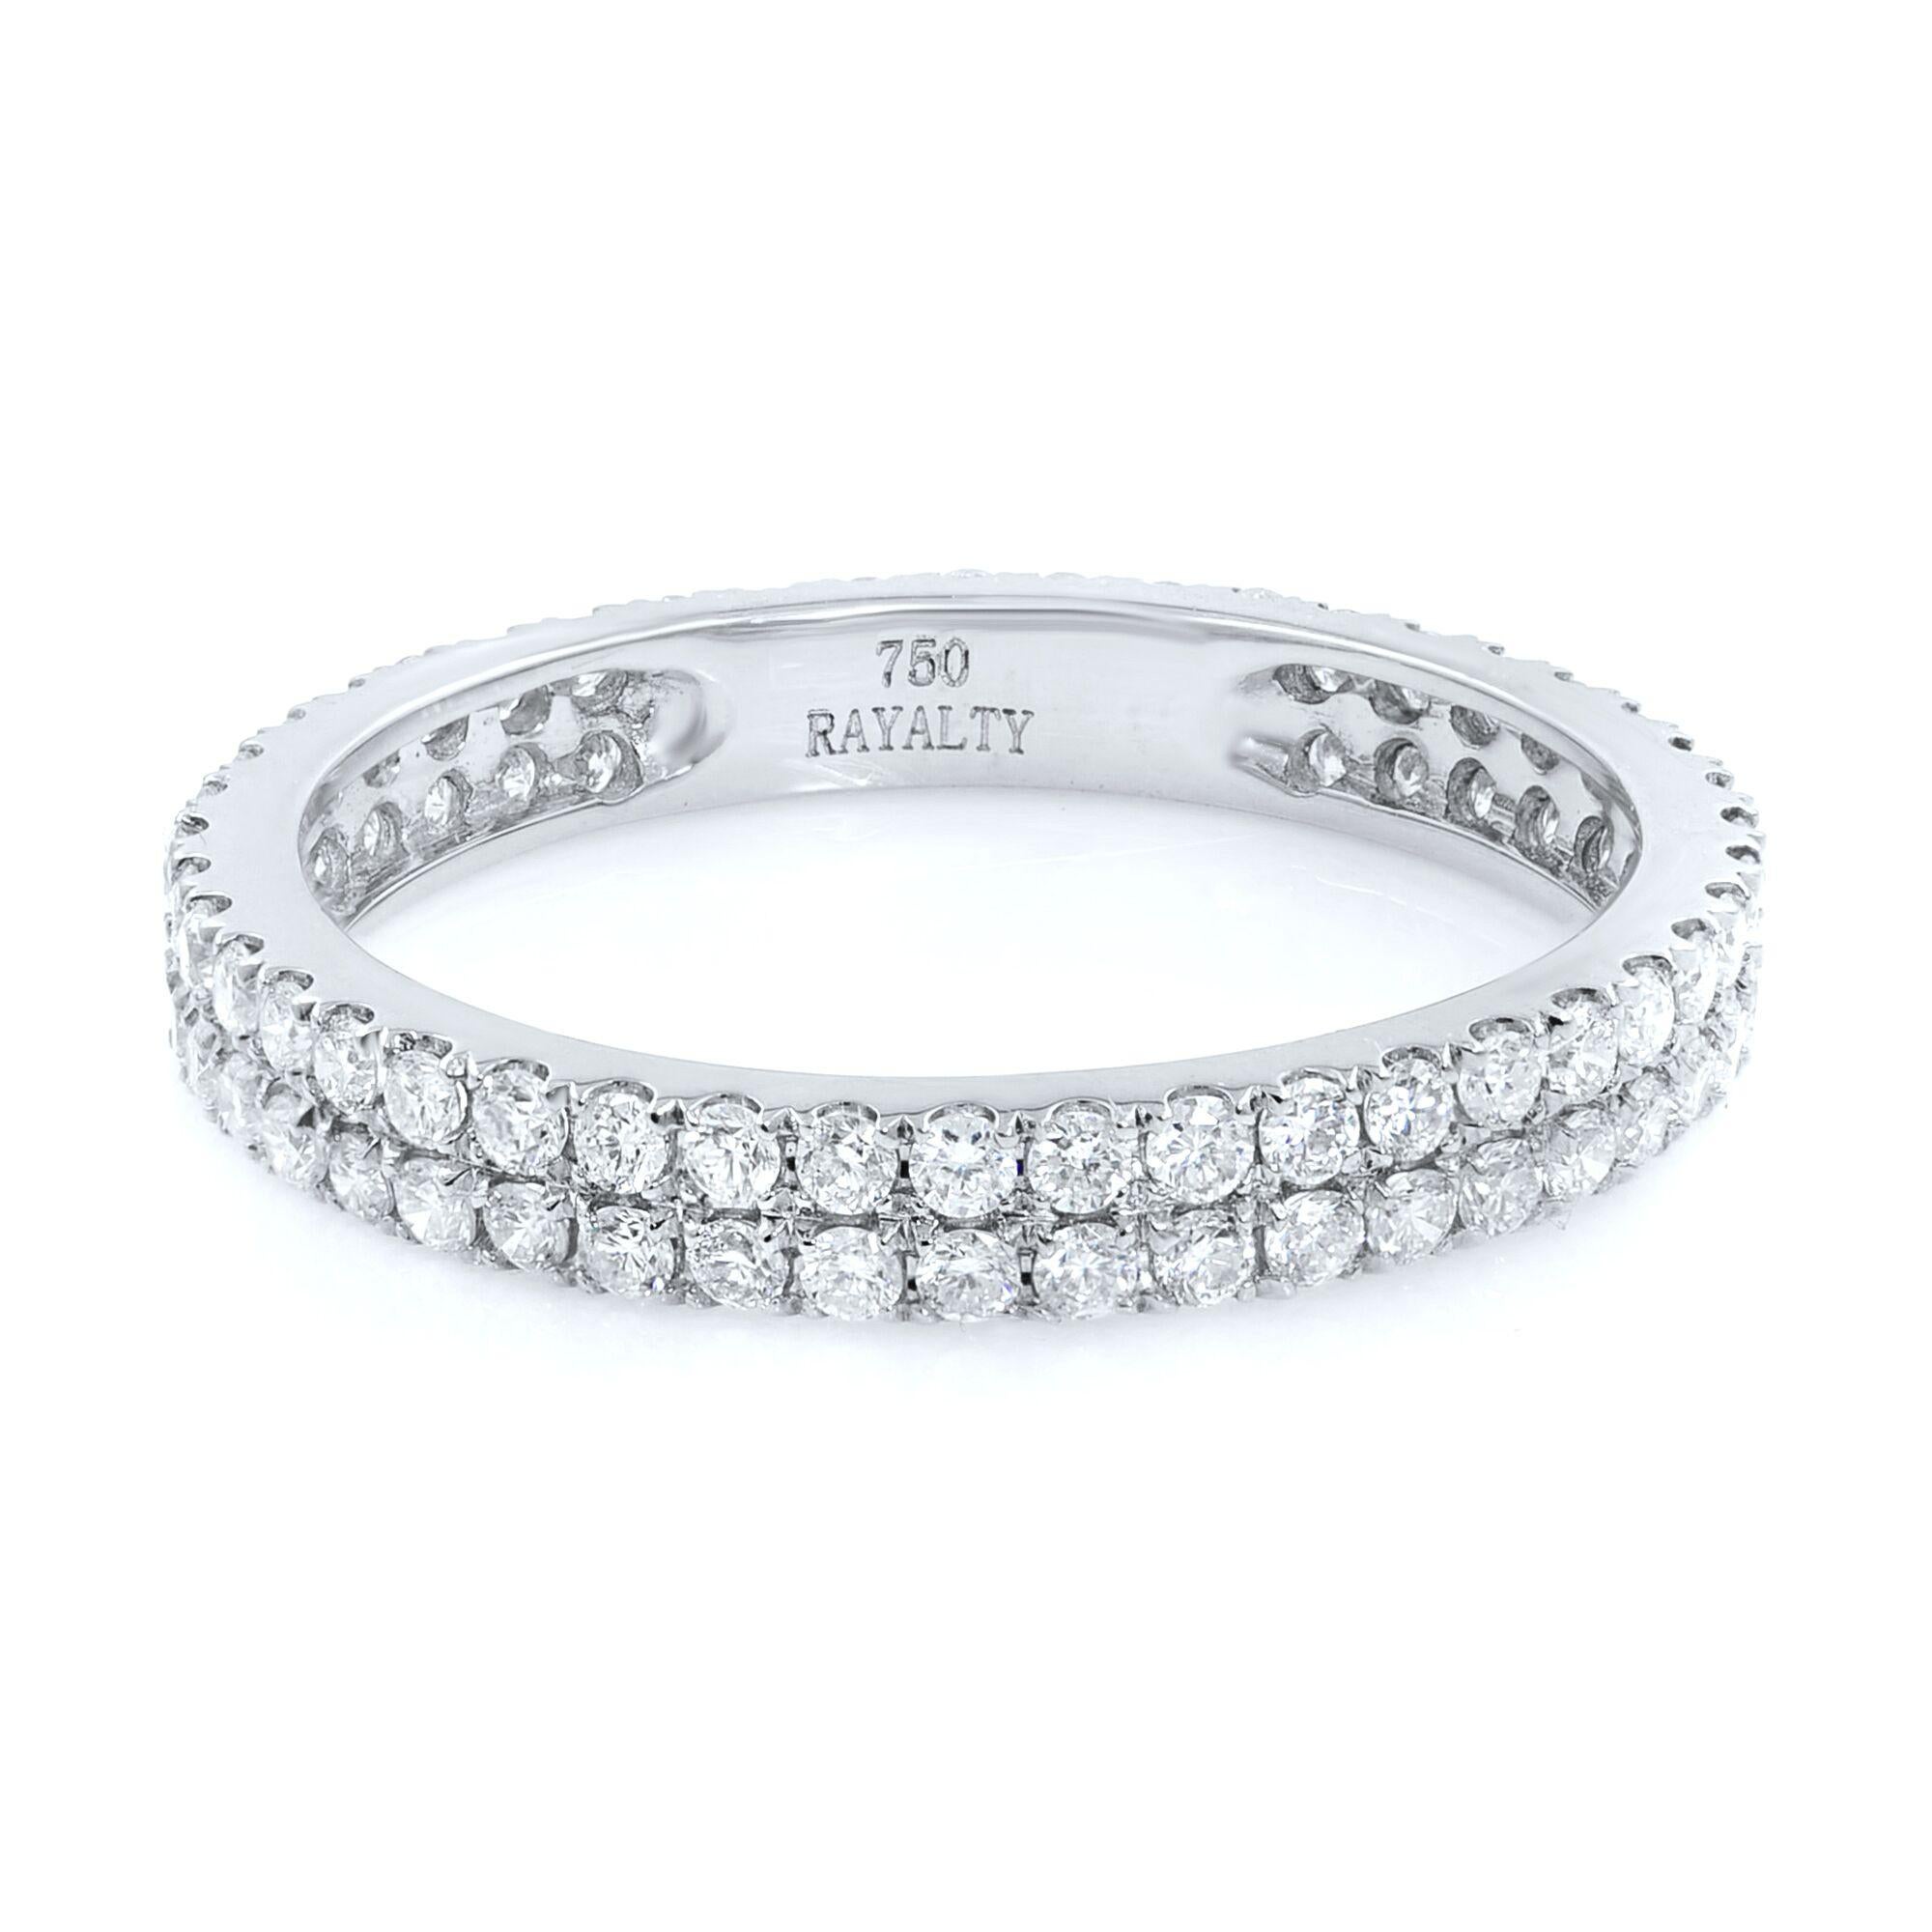 A double row of scalloped pave round Diamonds Eternity Band 18K White Gold 0.61cts
Size: 5.25
Weight: 1.4

